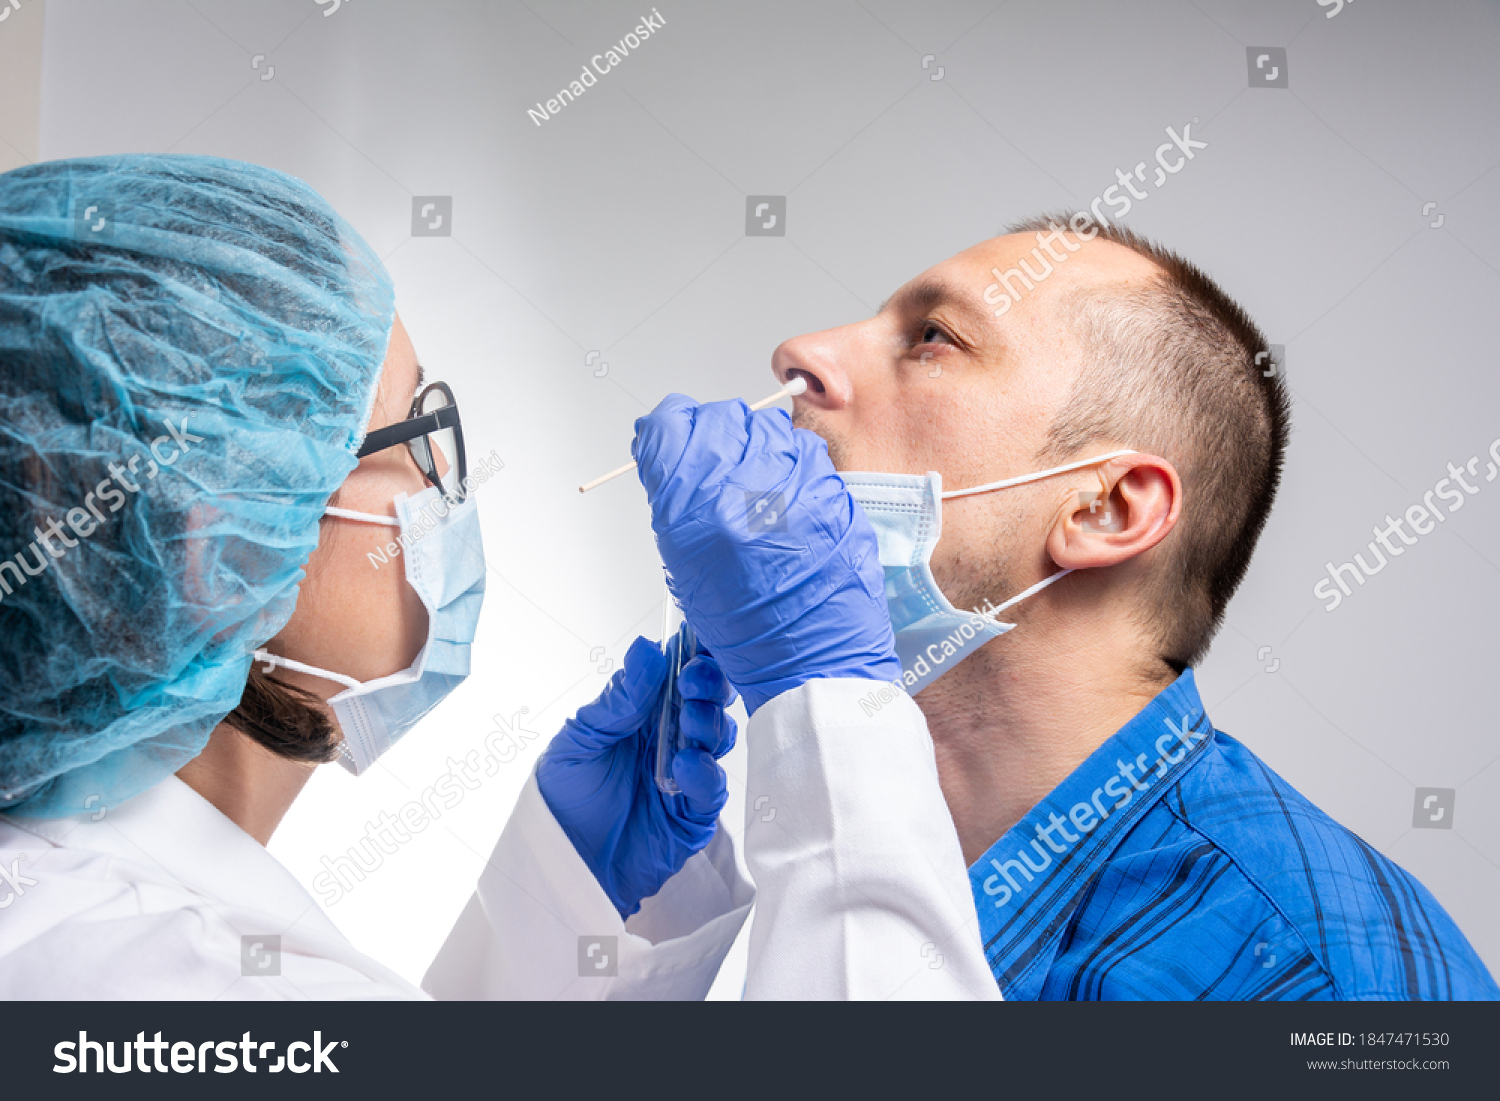 Coronavirus test - Medical worker taking a swab for corona virus sample from potentially infected man. covid-19 nasal swab test - doctor taking a mucus sample from patient nose in hospital #1847471530